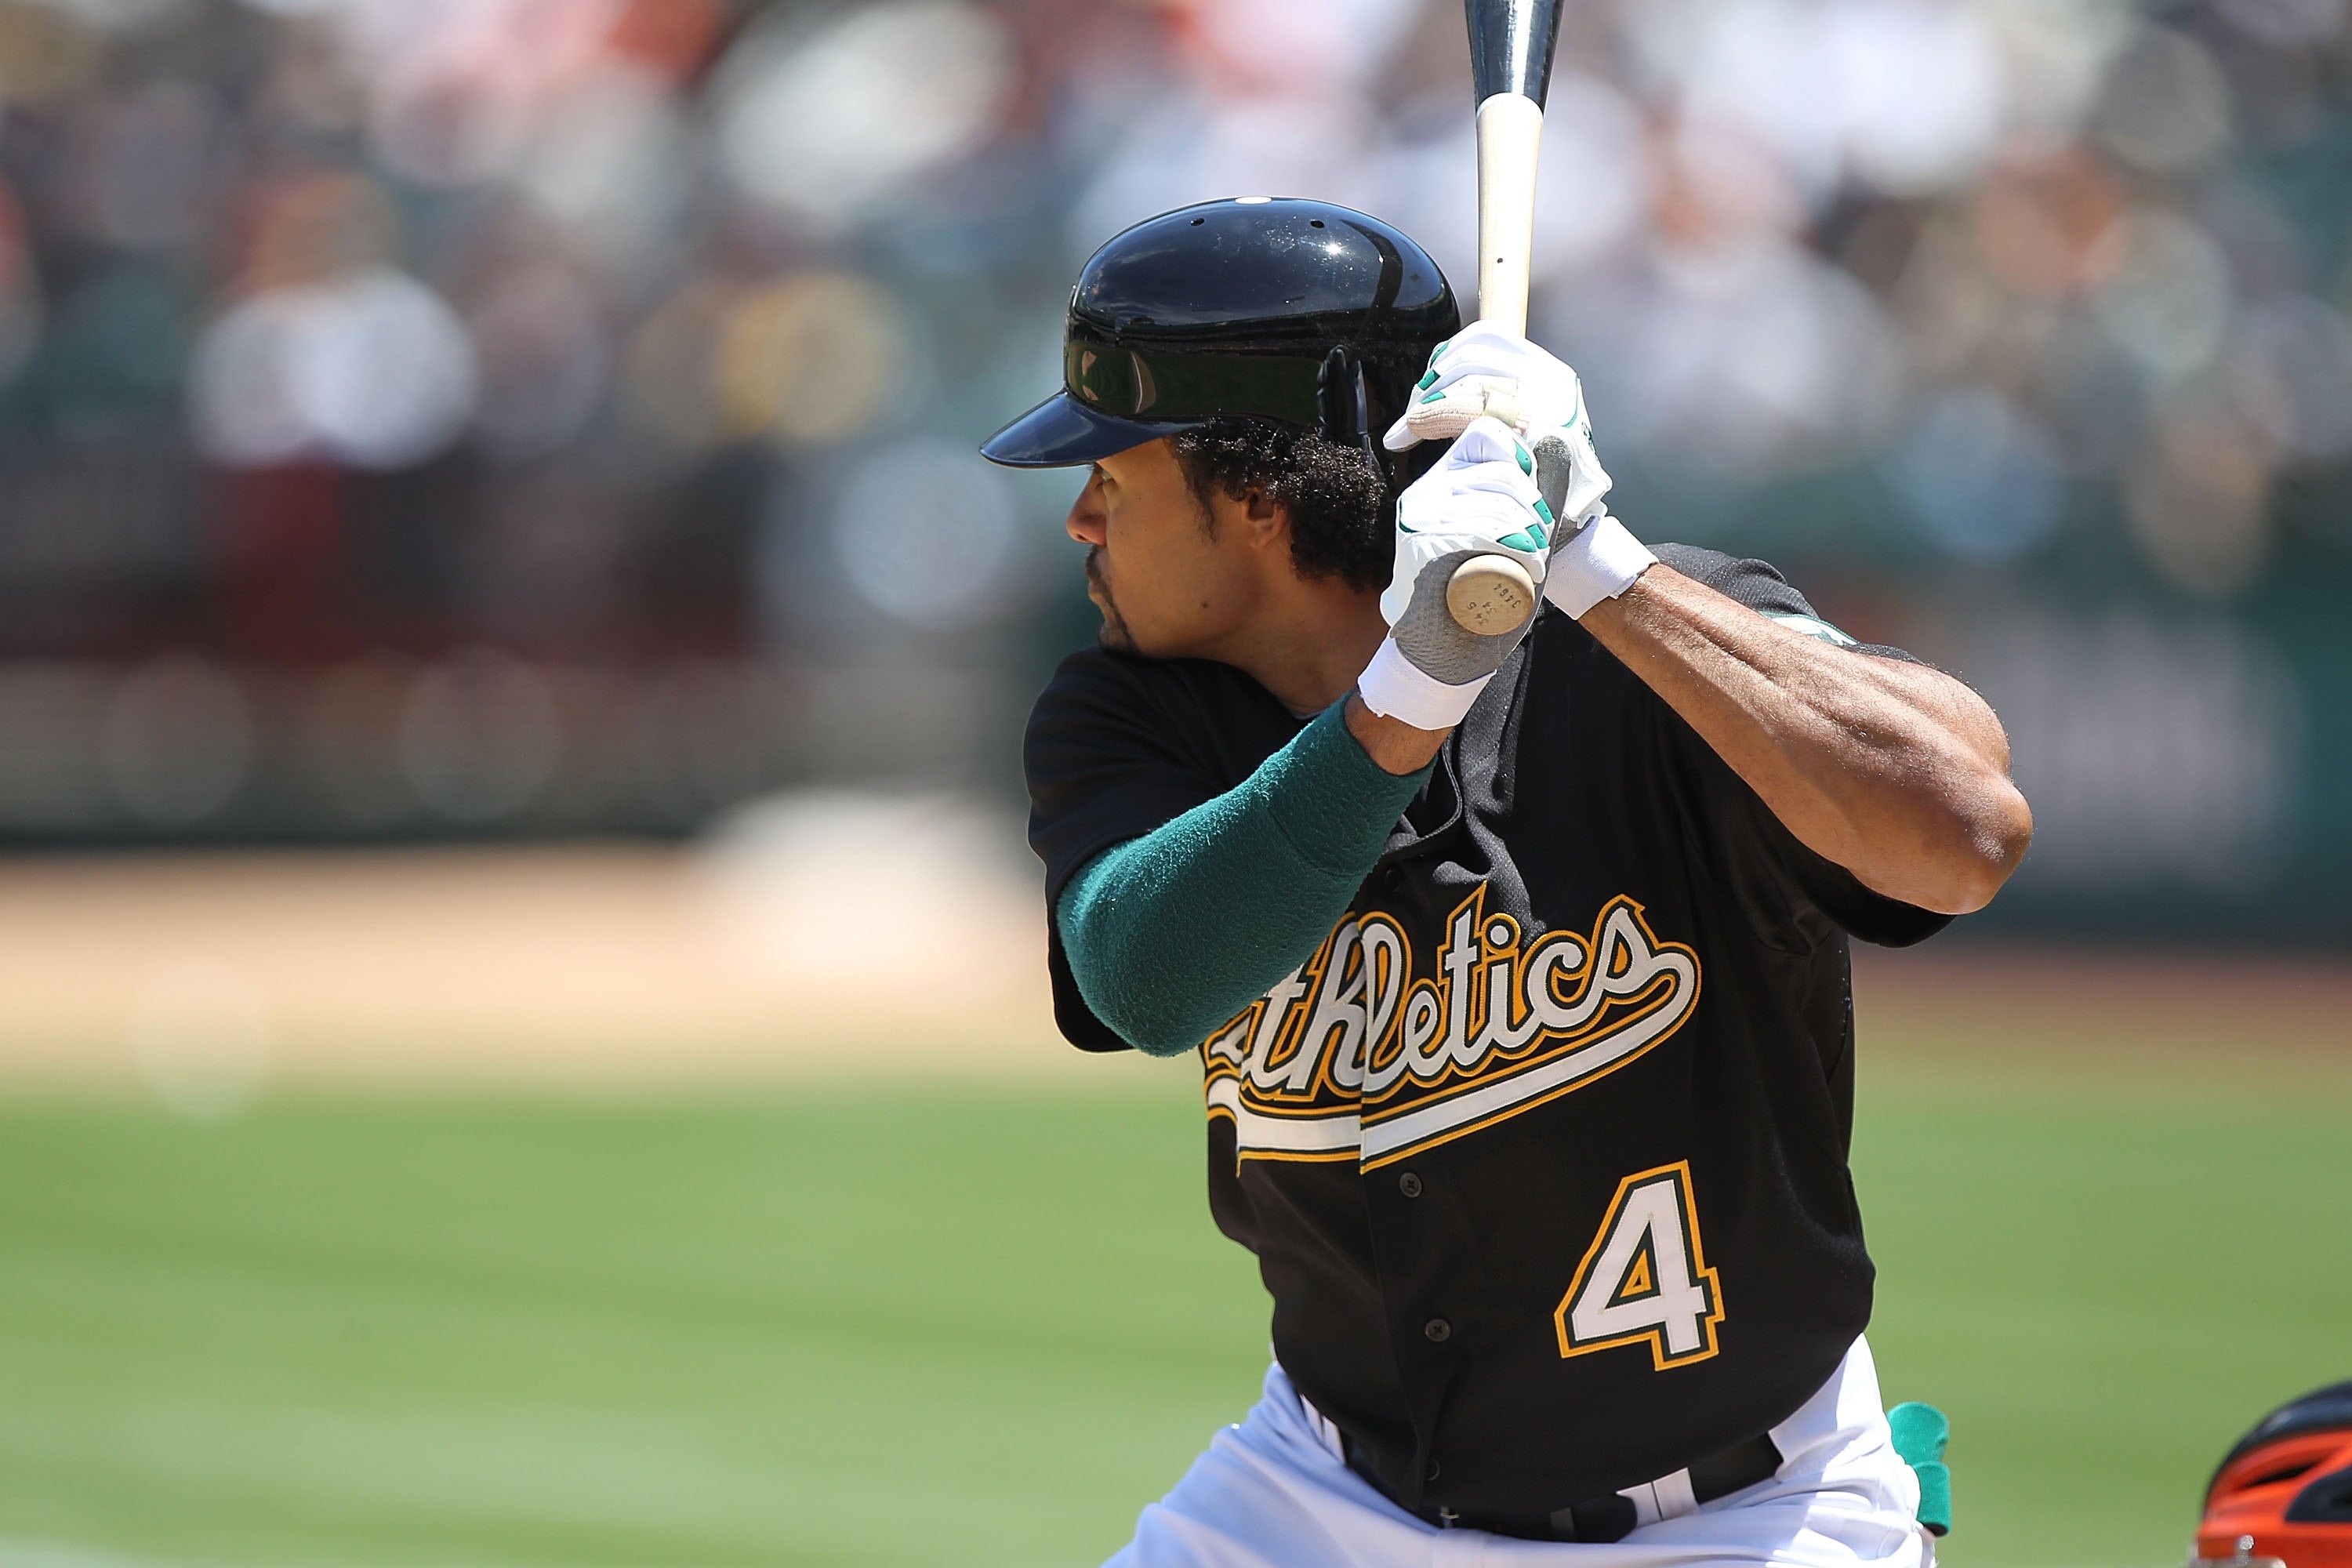 OAKLAND, CA - MAY 22:  Coco Crisp #4 of the Oakland Athletics bats against the San Francisco Giants during an MLB game at the Oakland-Alameda County Coliseum on May 22, 2010 in Oakland, California.  (Photo by Jed Jacobsohn/Getty Images)